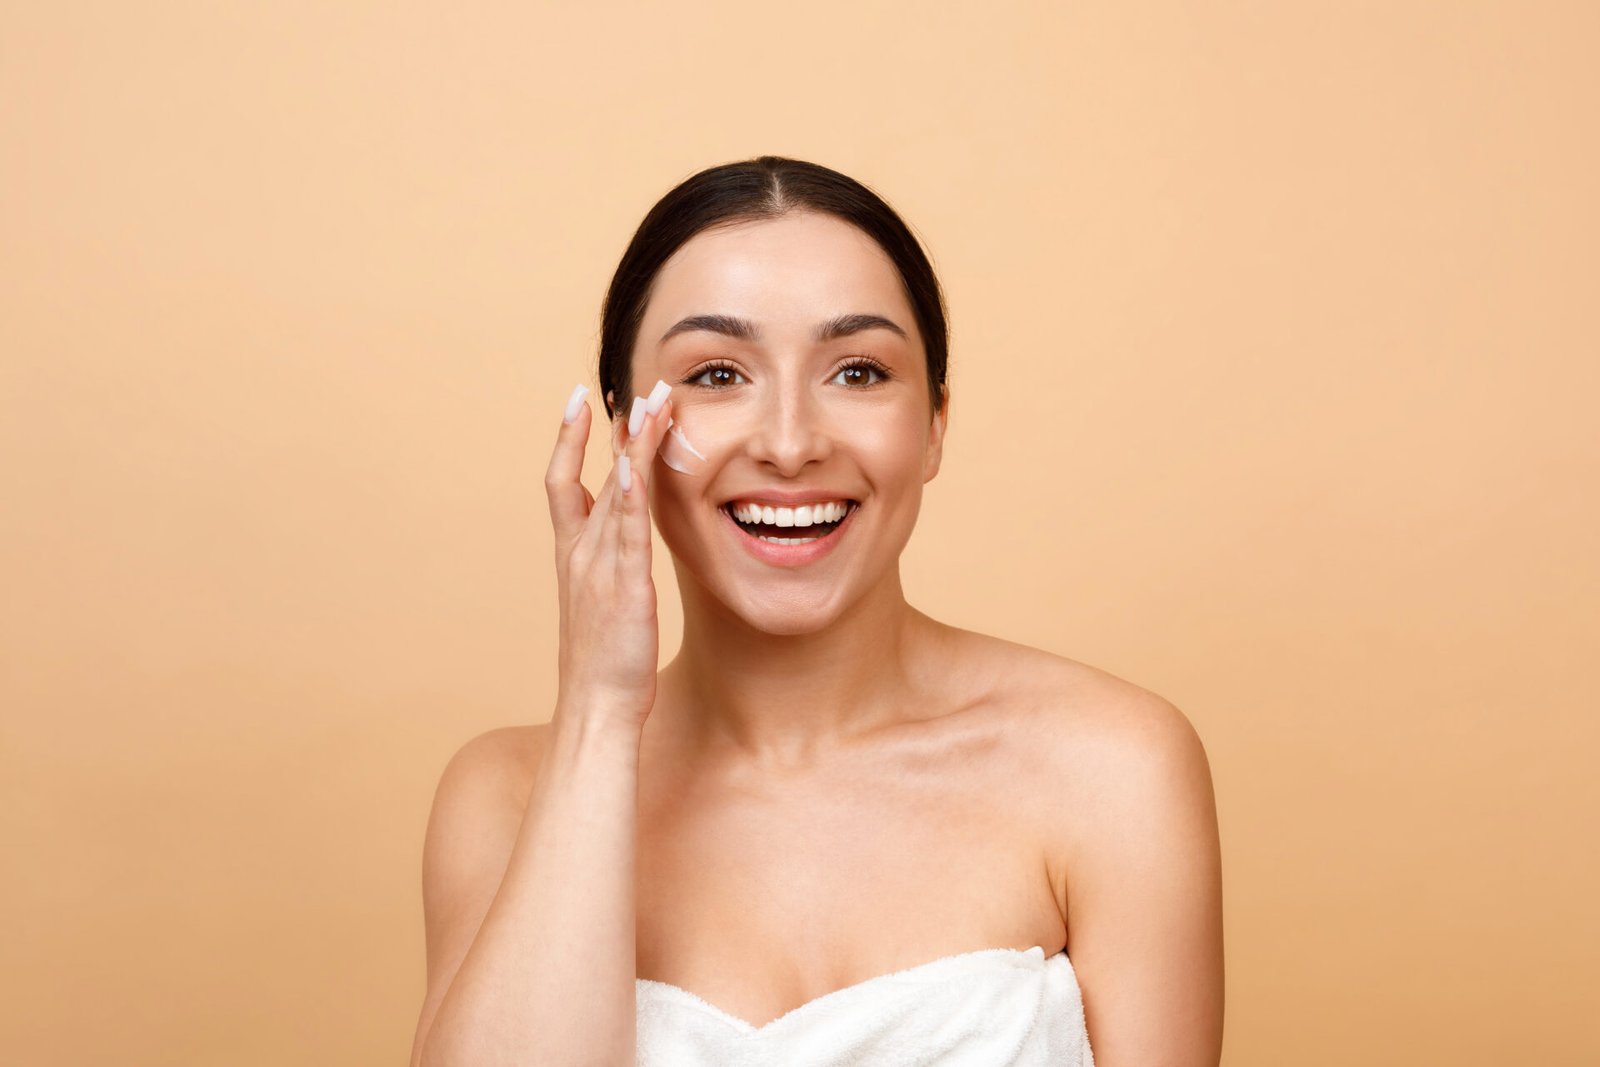 Skincare Routine. Happy Young Indian Woman Applying Moisturizing Cream On Face, Smiling Beautiful Hindu Female Wrapped In Towel Rubbing Nourishing Lotion While Posing On Beige Background, Copy Space